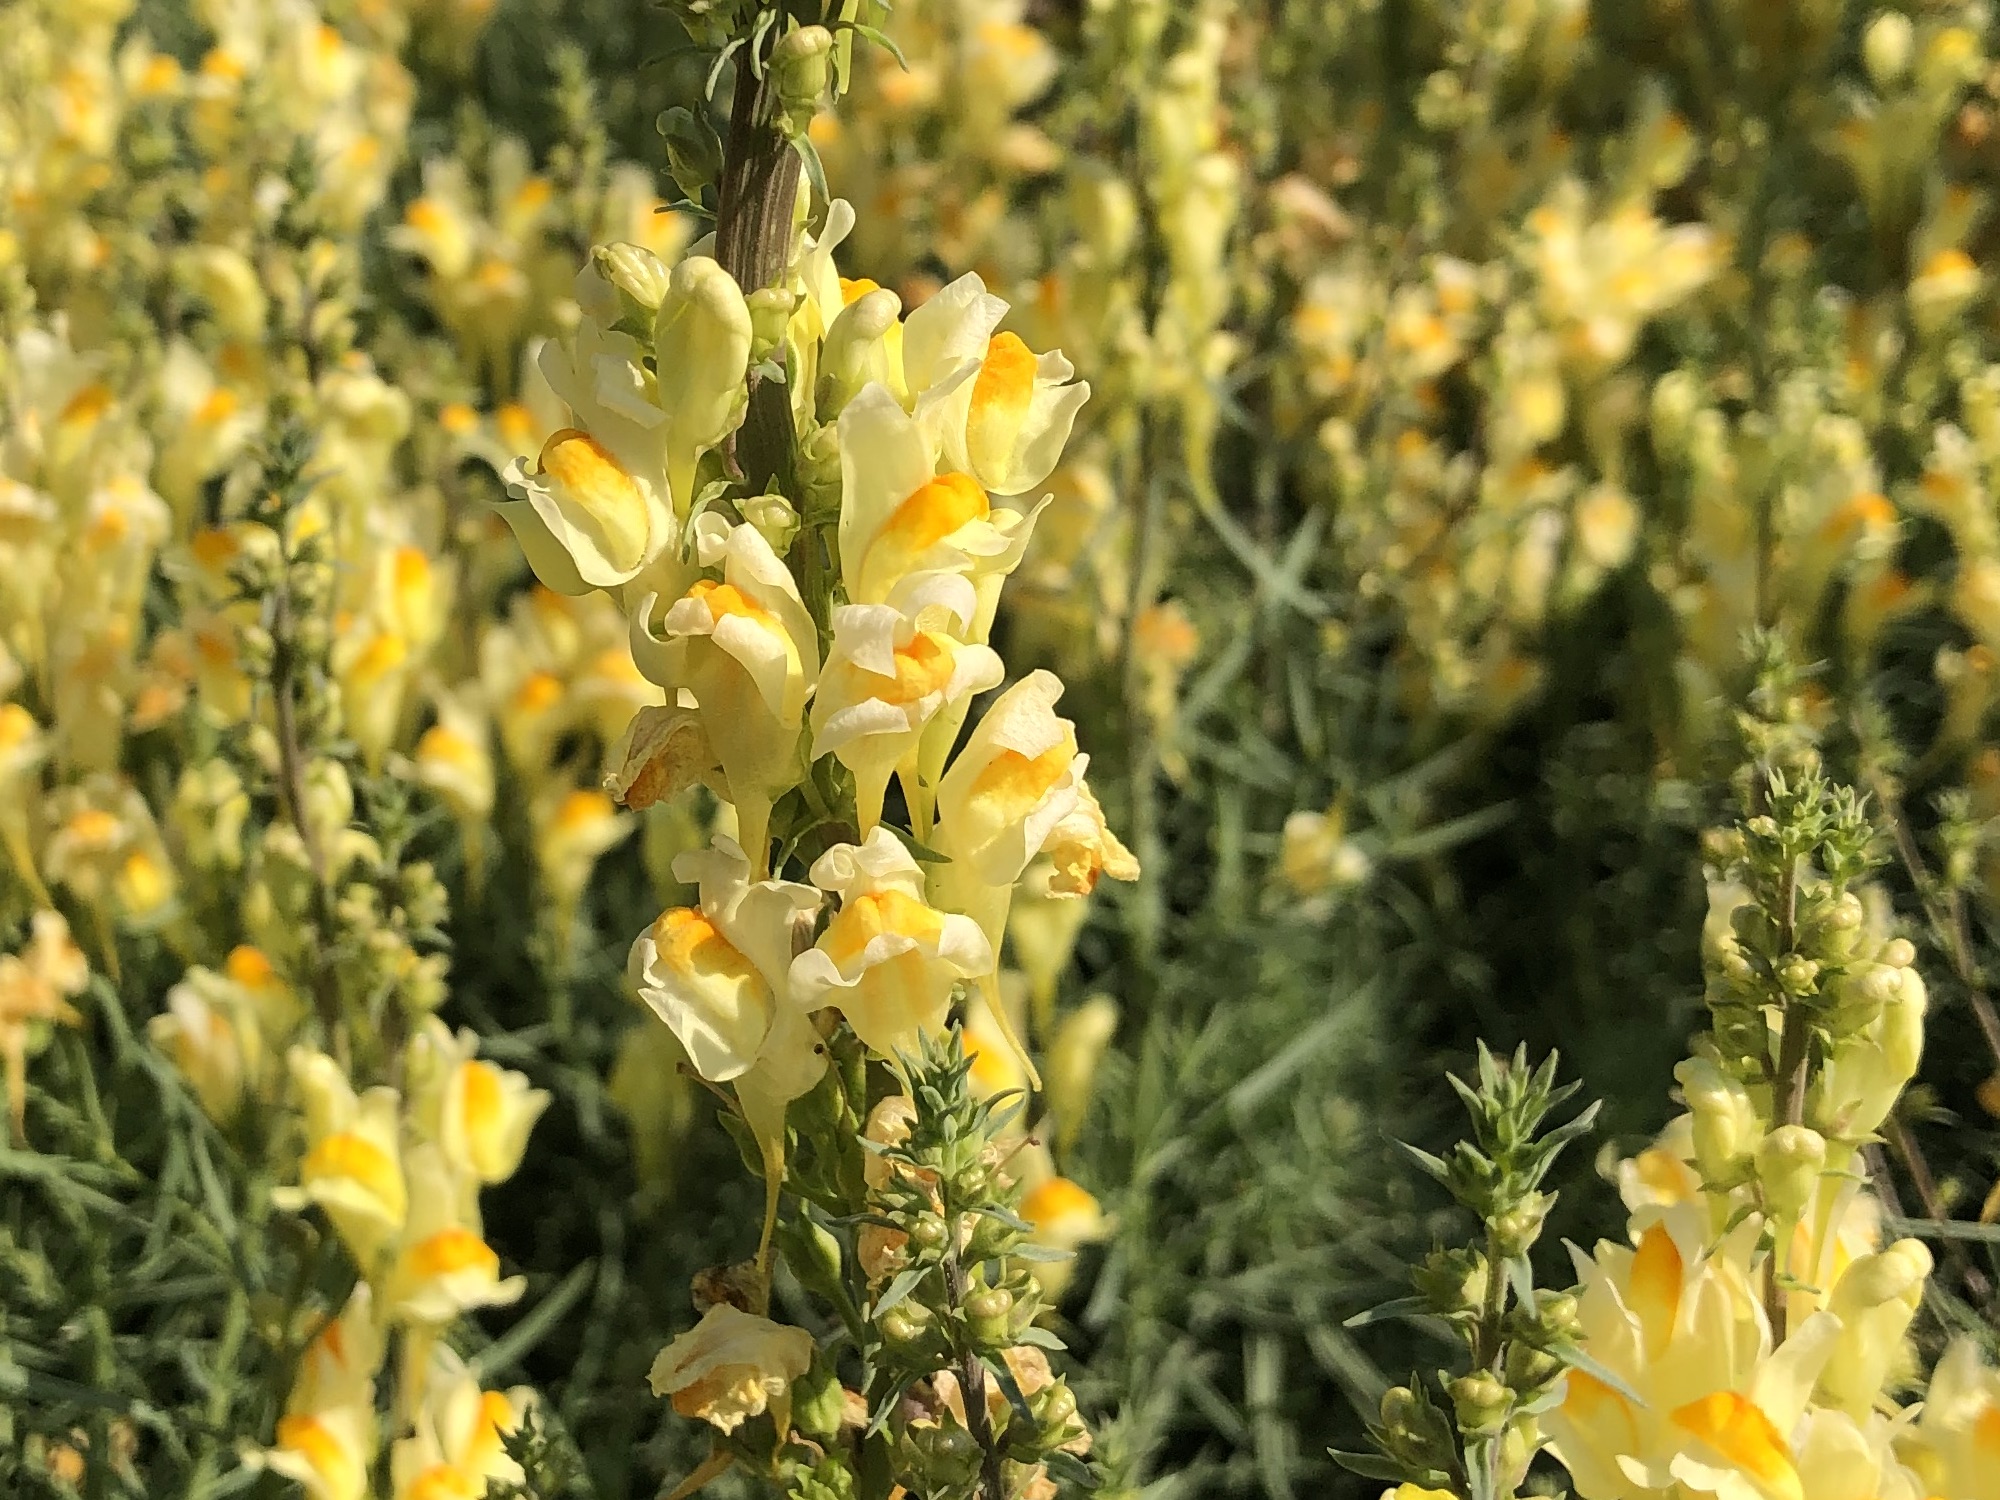 Yellow toadflax (Butter-and-eggs).